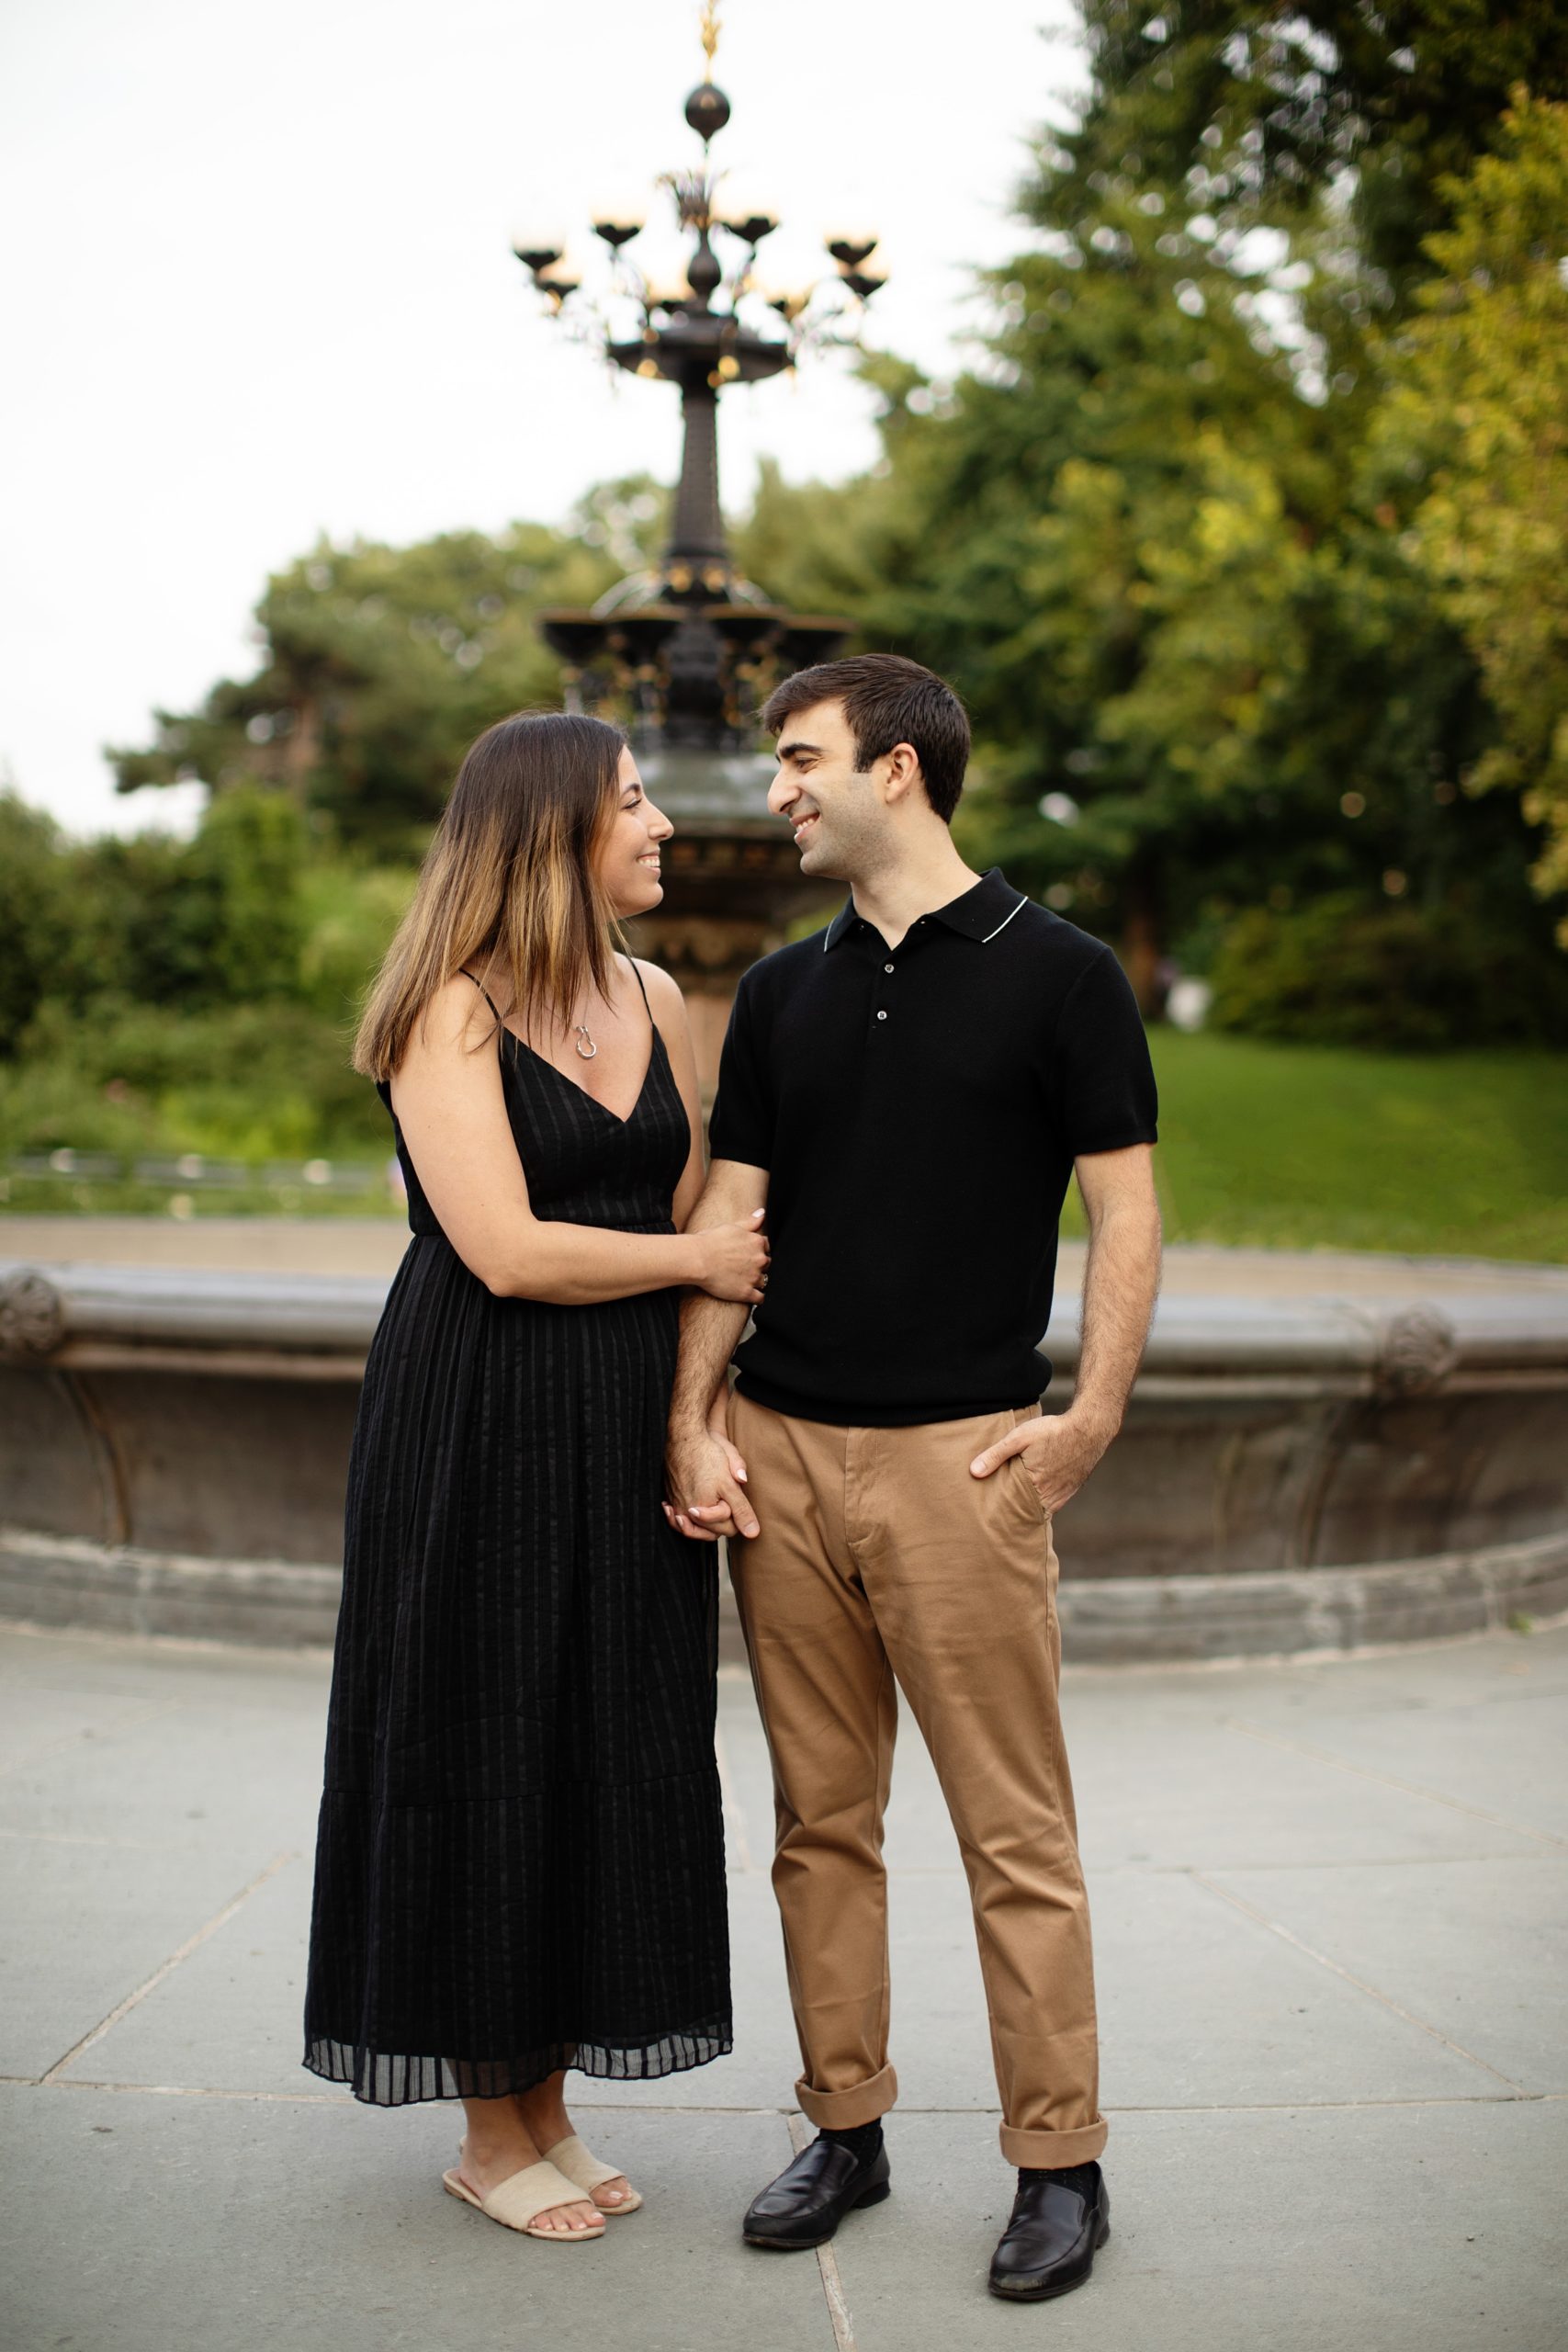 Central Park New York City Summer Romantic Chic Engagement Photos, captured by New York City Engagement and Wedding Photographers Janae Rose Photography